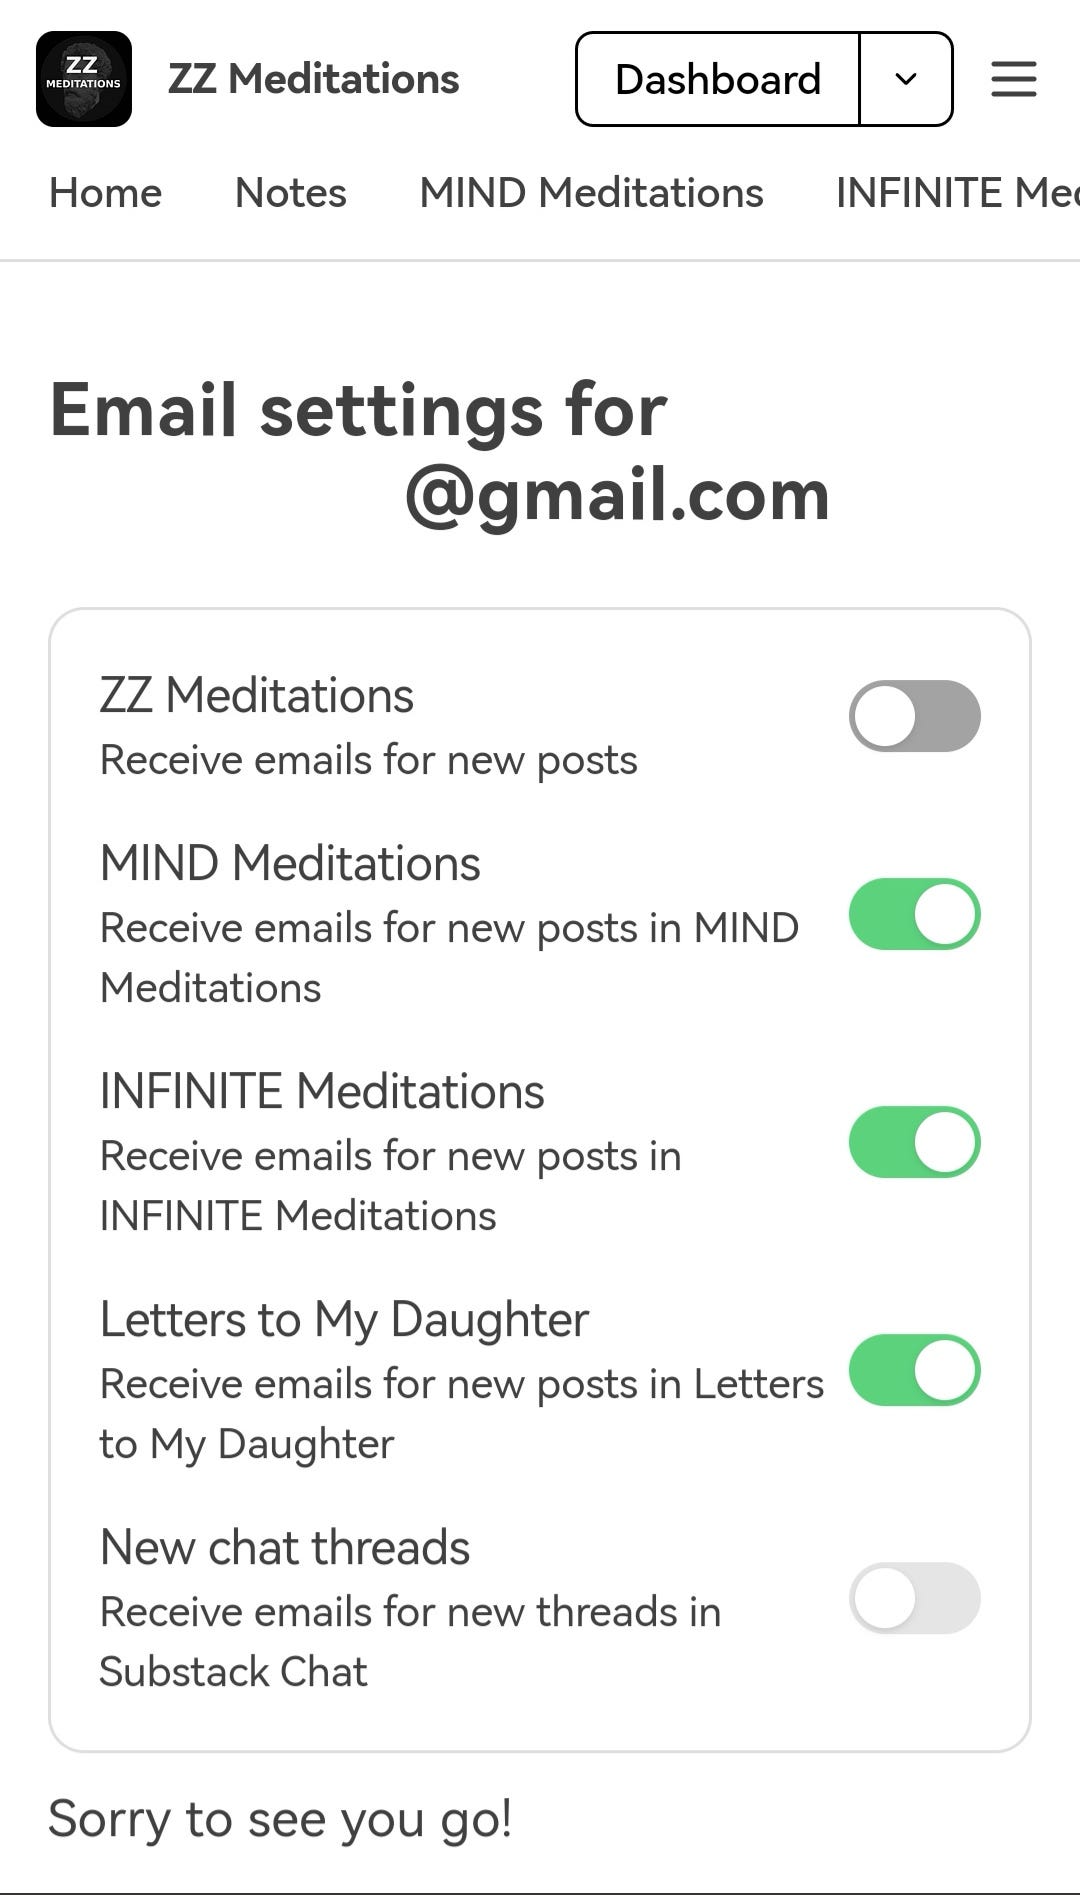 If you click on “unsubscribe” in the emails you receive from ZZ Meditations, you can choose which notifications you wish to receive and unselect the ones you’re not interested in.